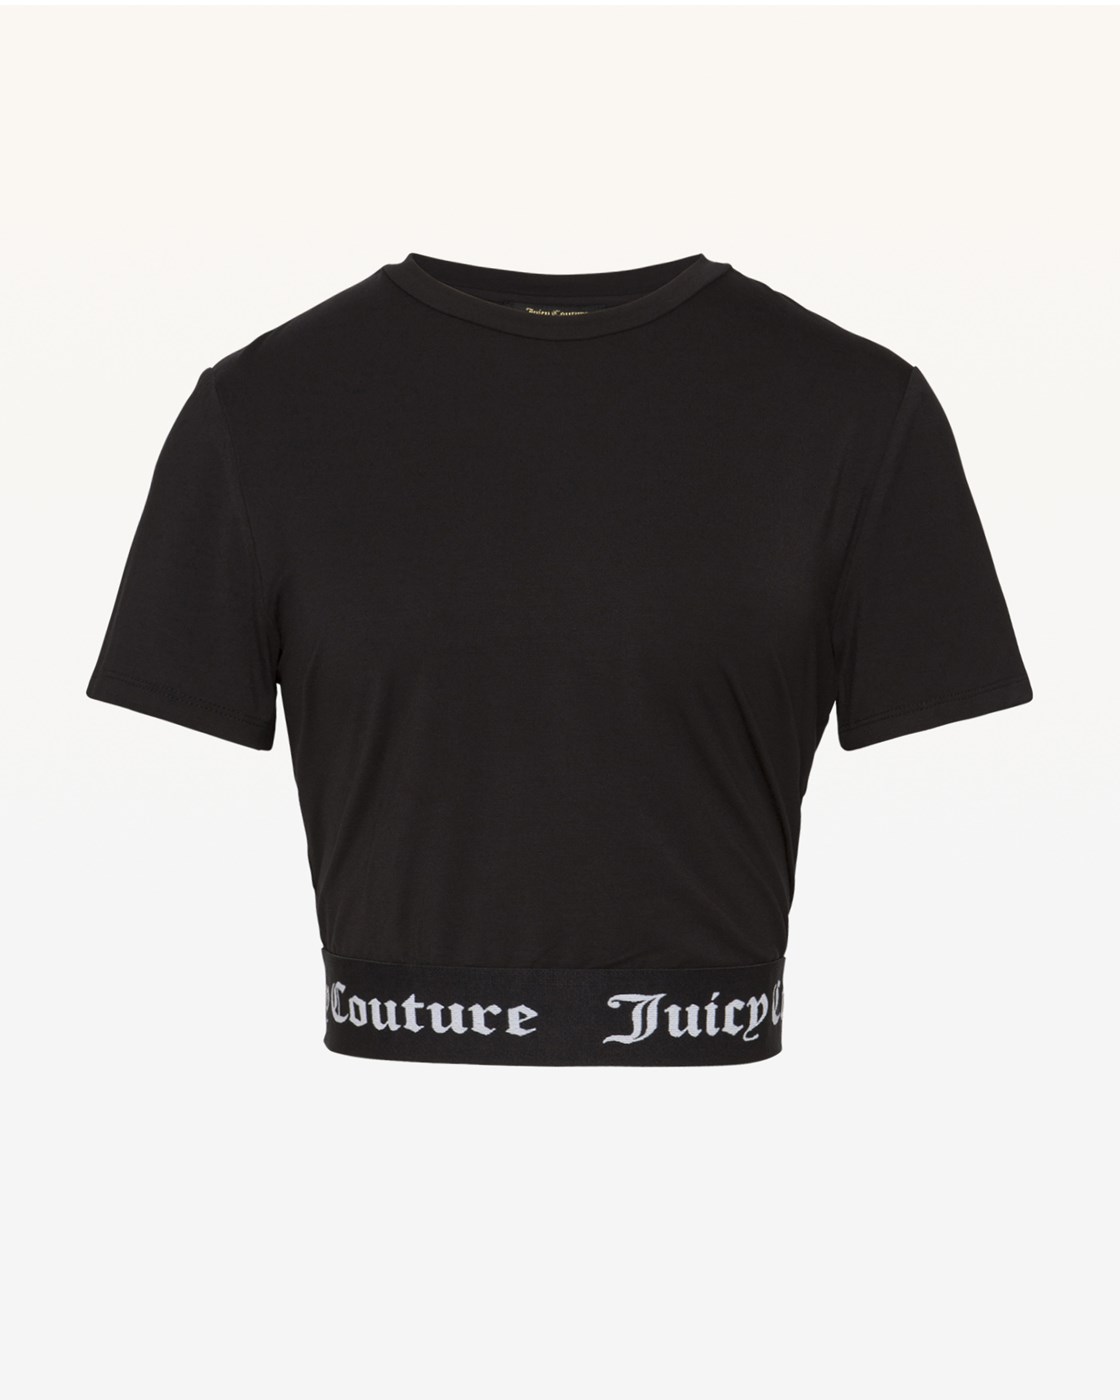 Juicy Couture Jacquard Tee